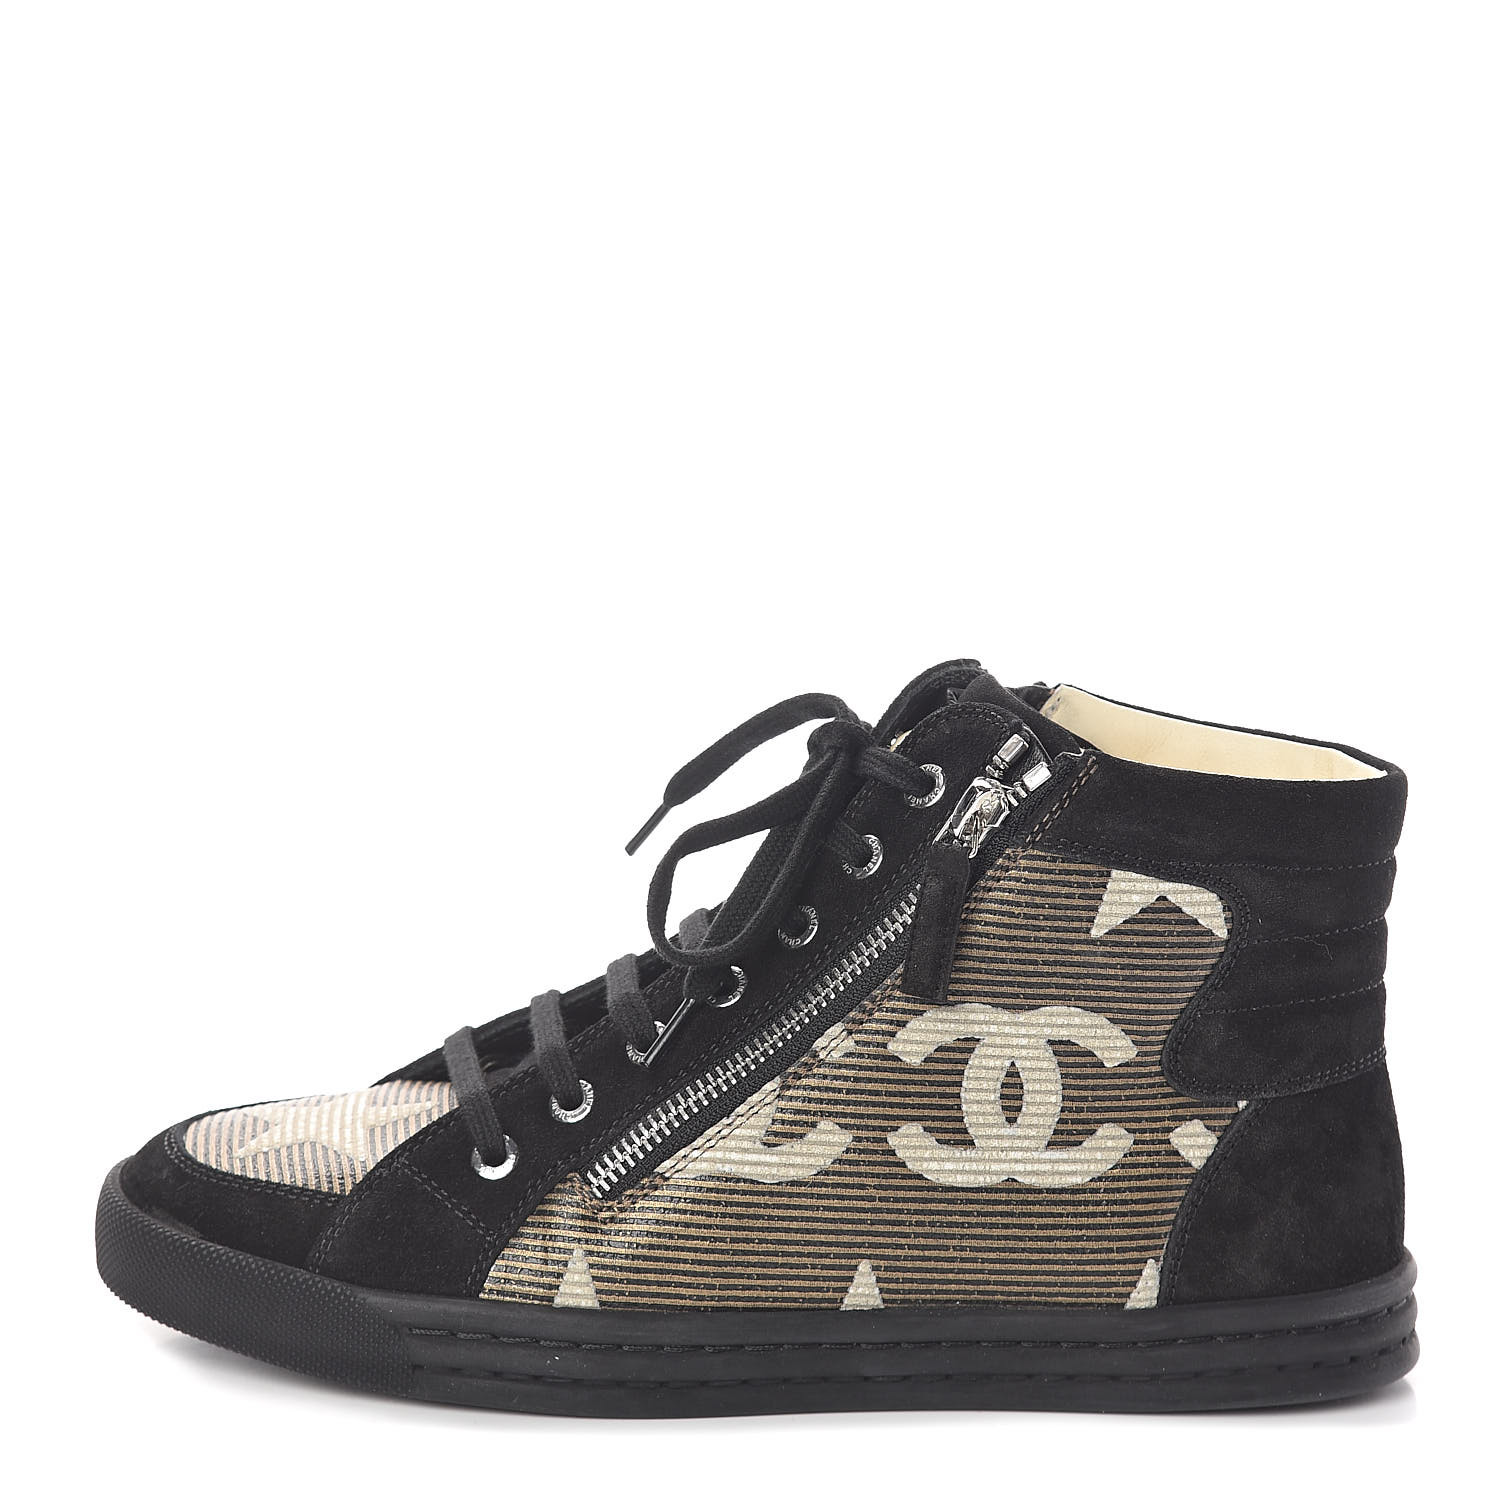 sneakers chanel 219